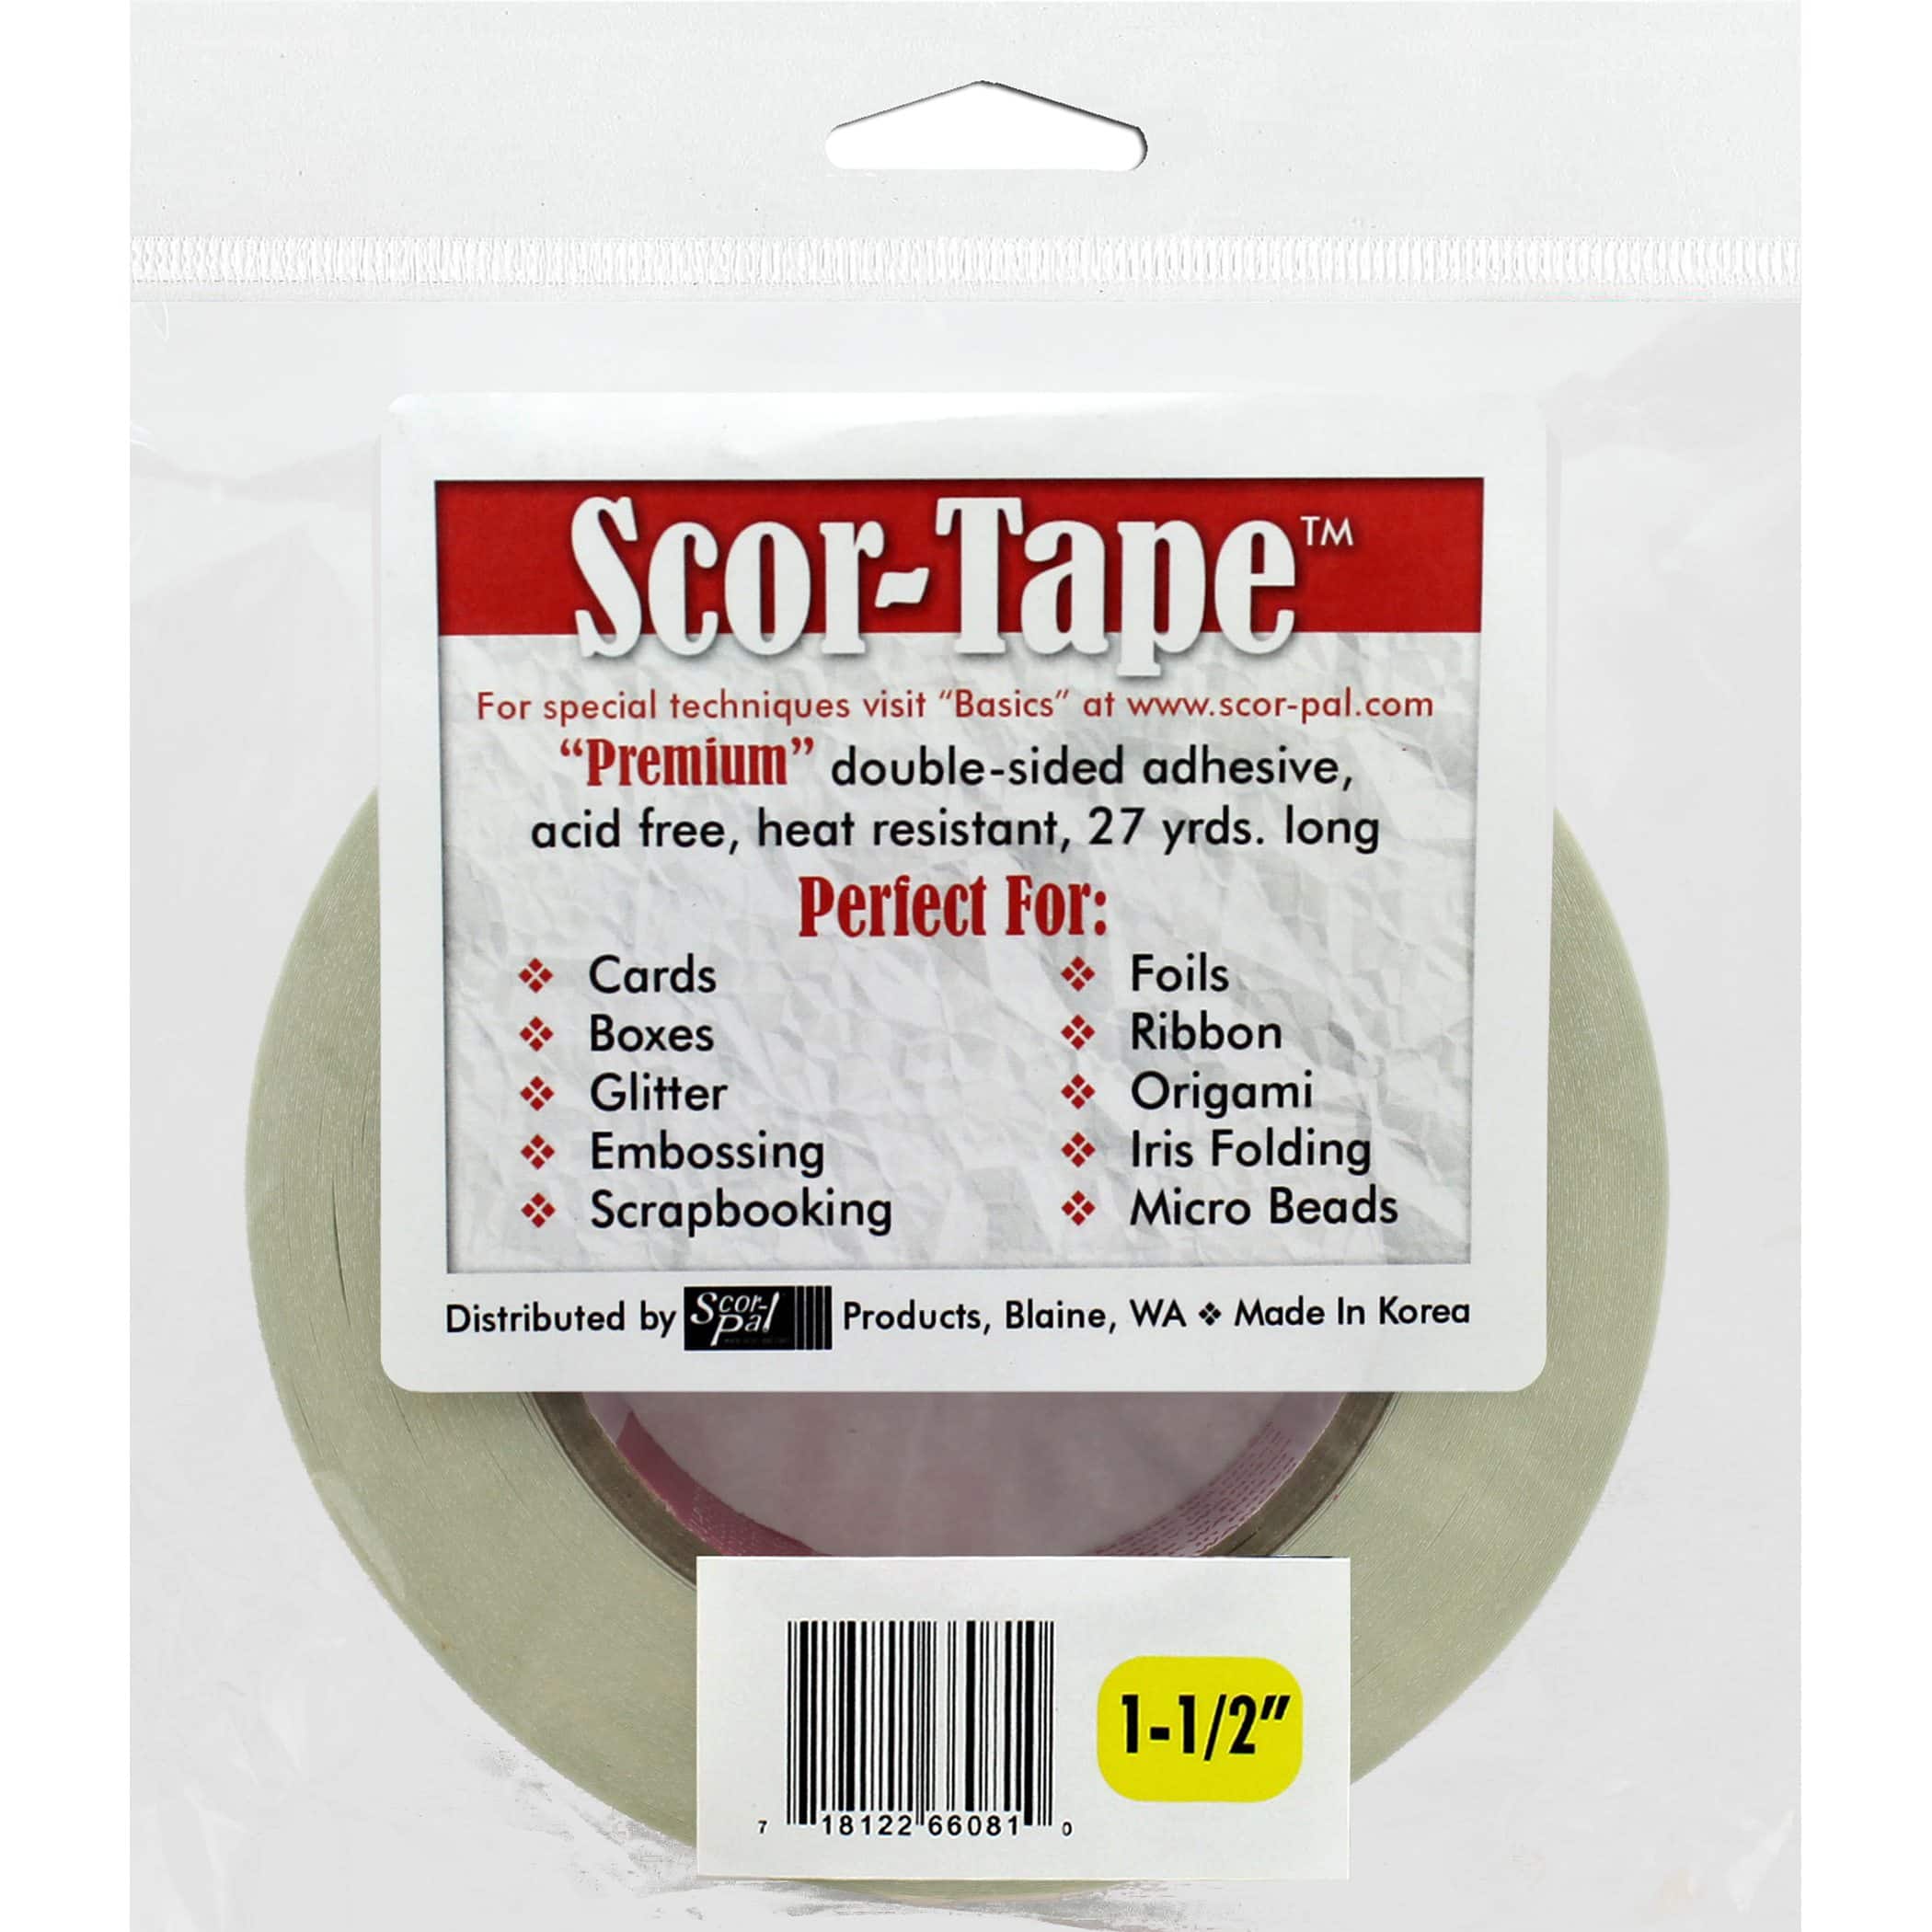 Scor-Tape Double Sided Adhesive 1/2 Roll